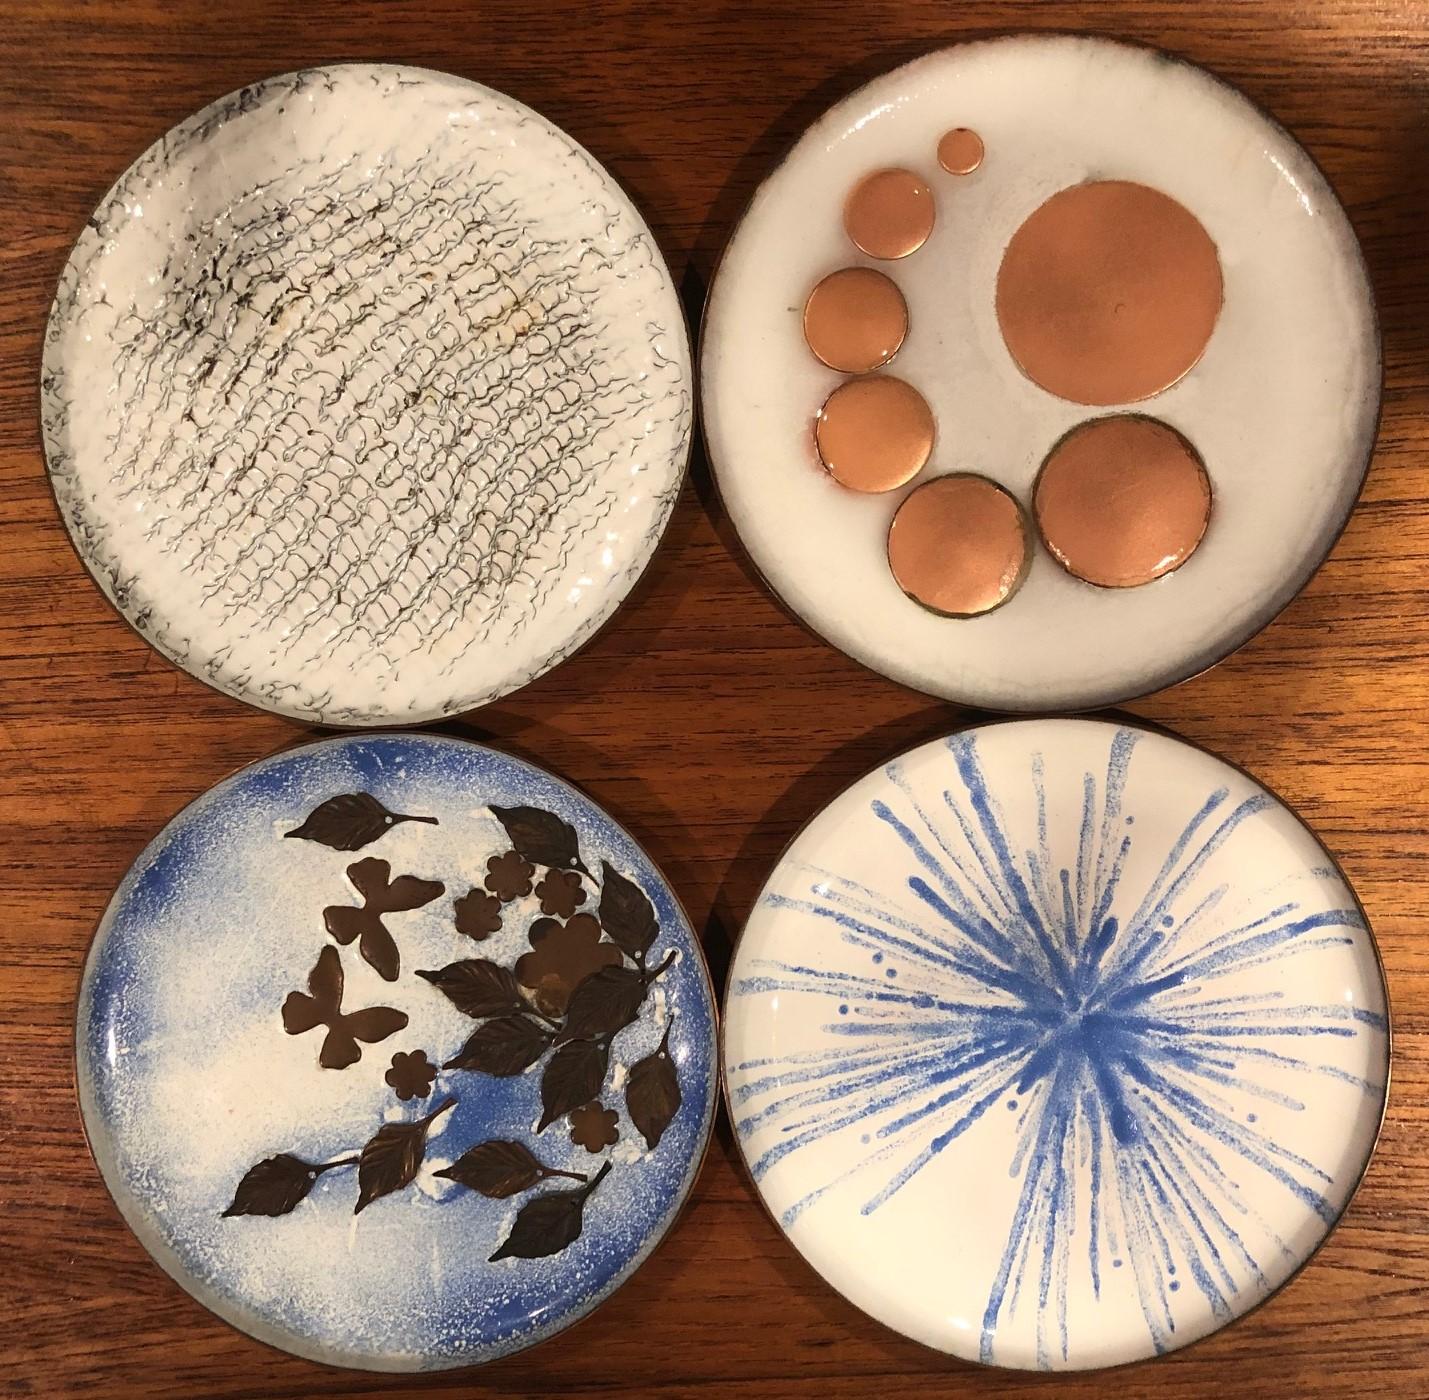 Gorgeous set of four Mid-Century Modern enamel on copper plates, circa 1960s. The plates are in very good condition and measure 5.75